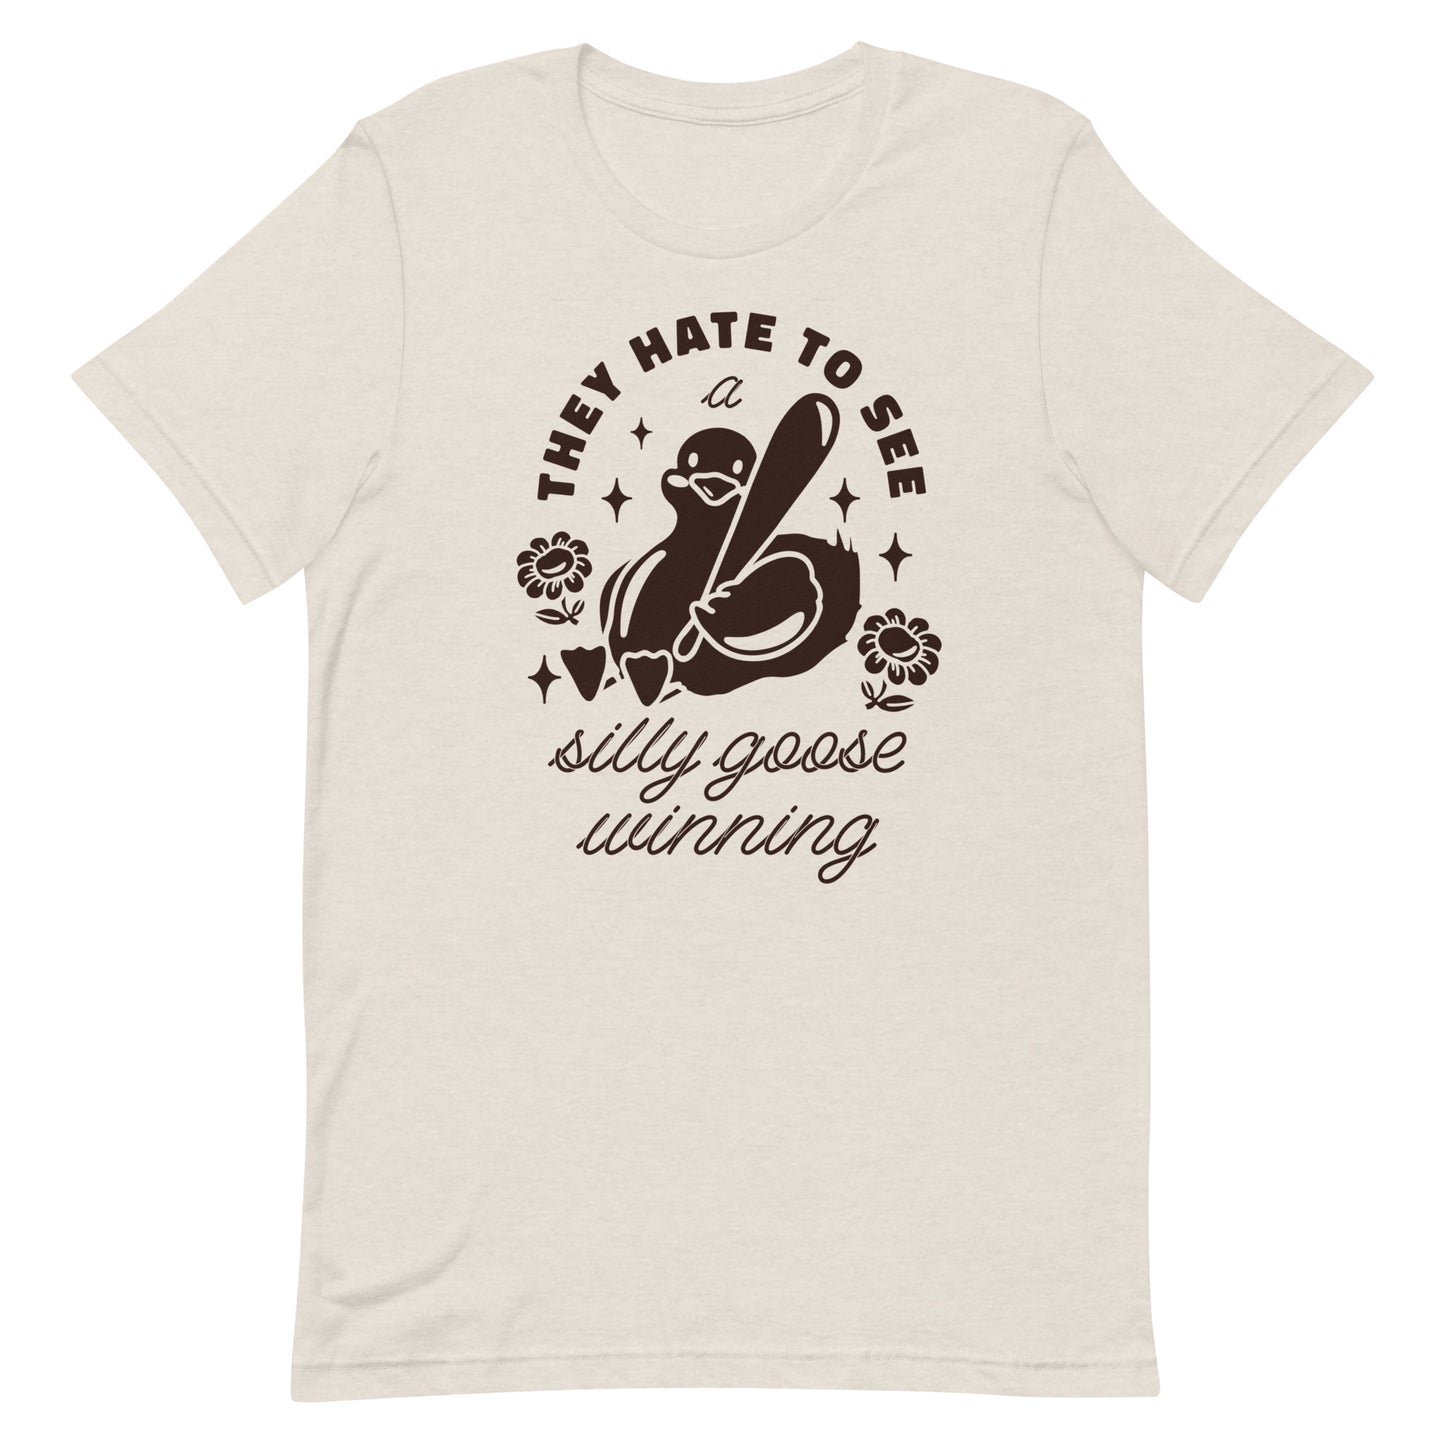 They Hate To See a Silly Goose Winning Unisex t-shirt